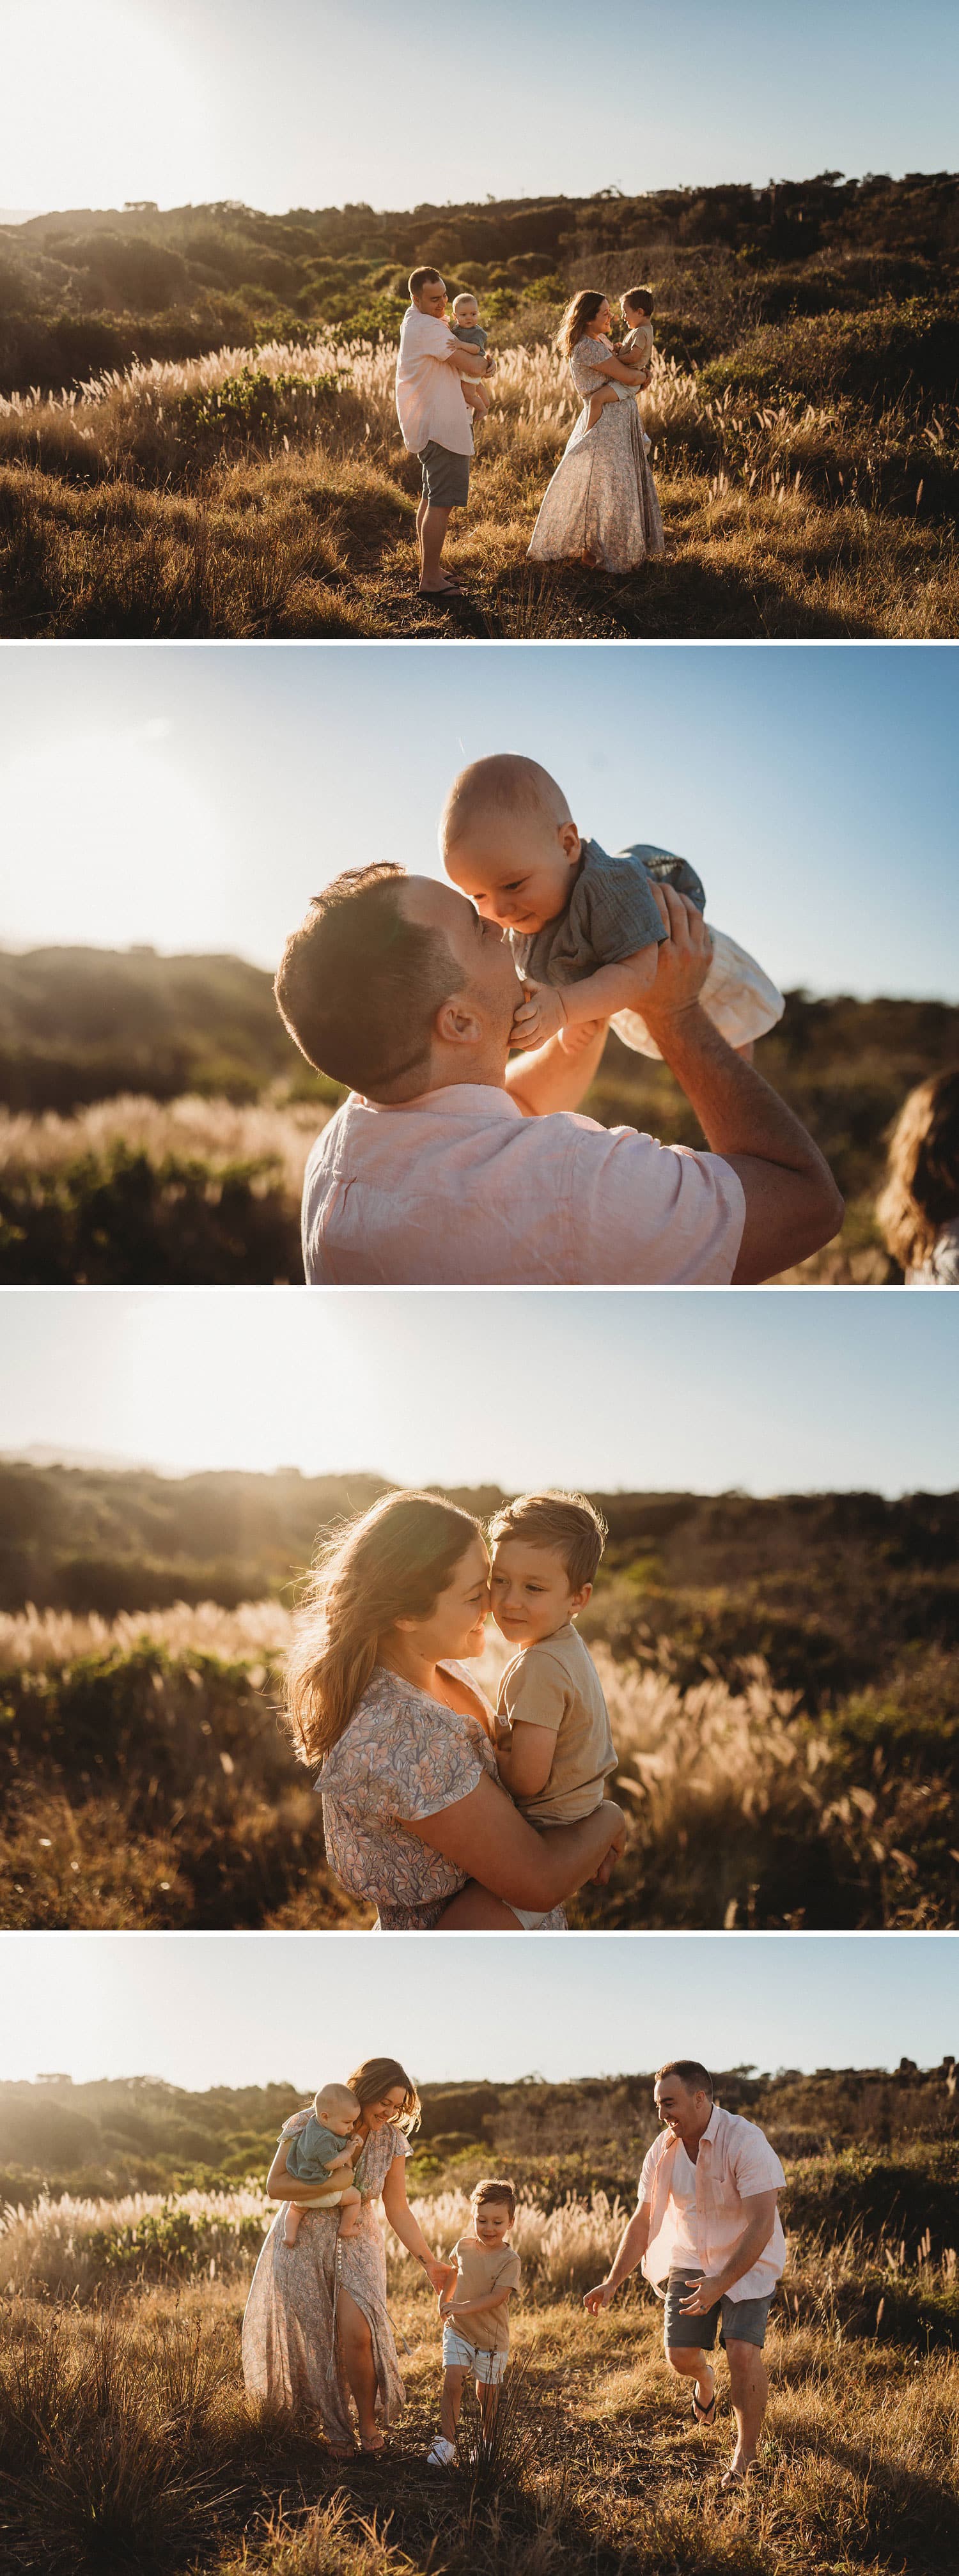 Candid-family-photography-sutherland-shire-a4